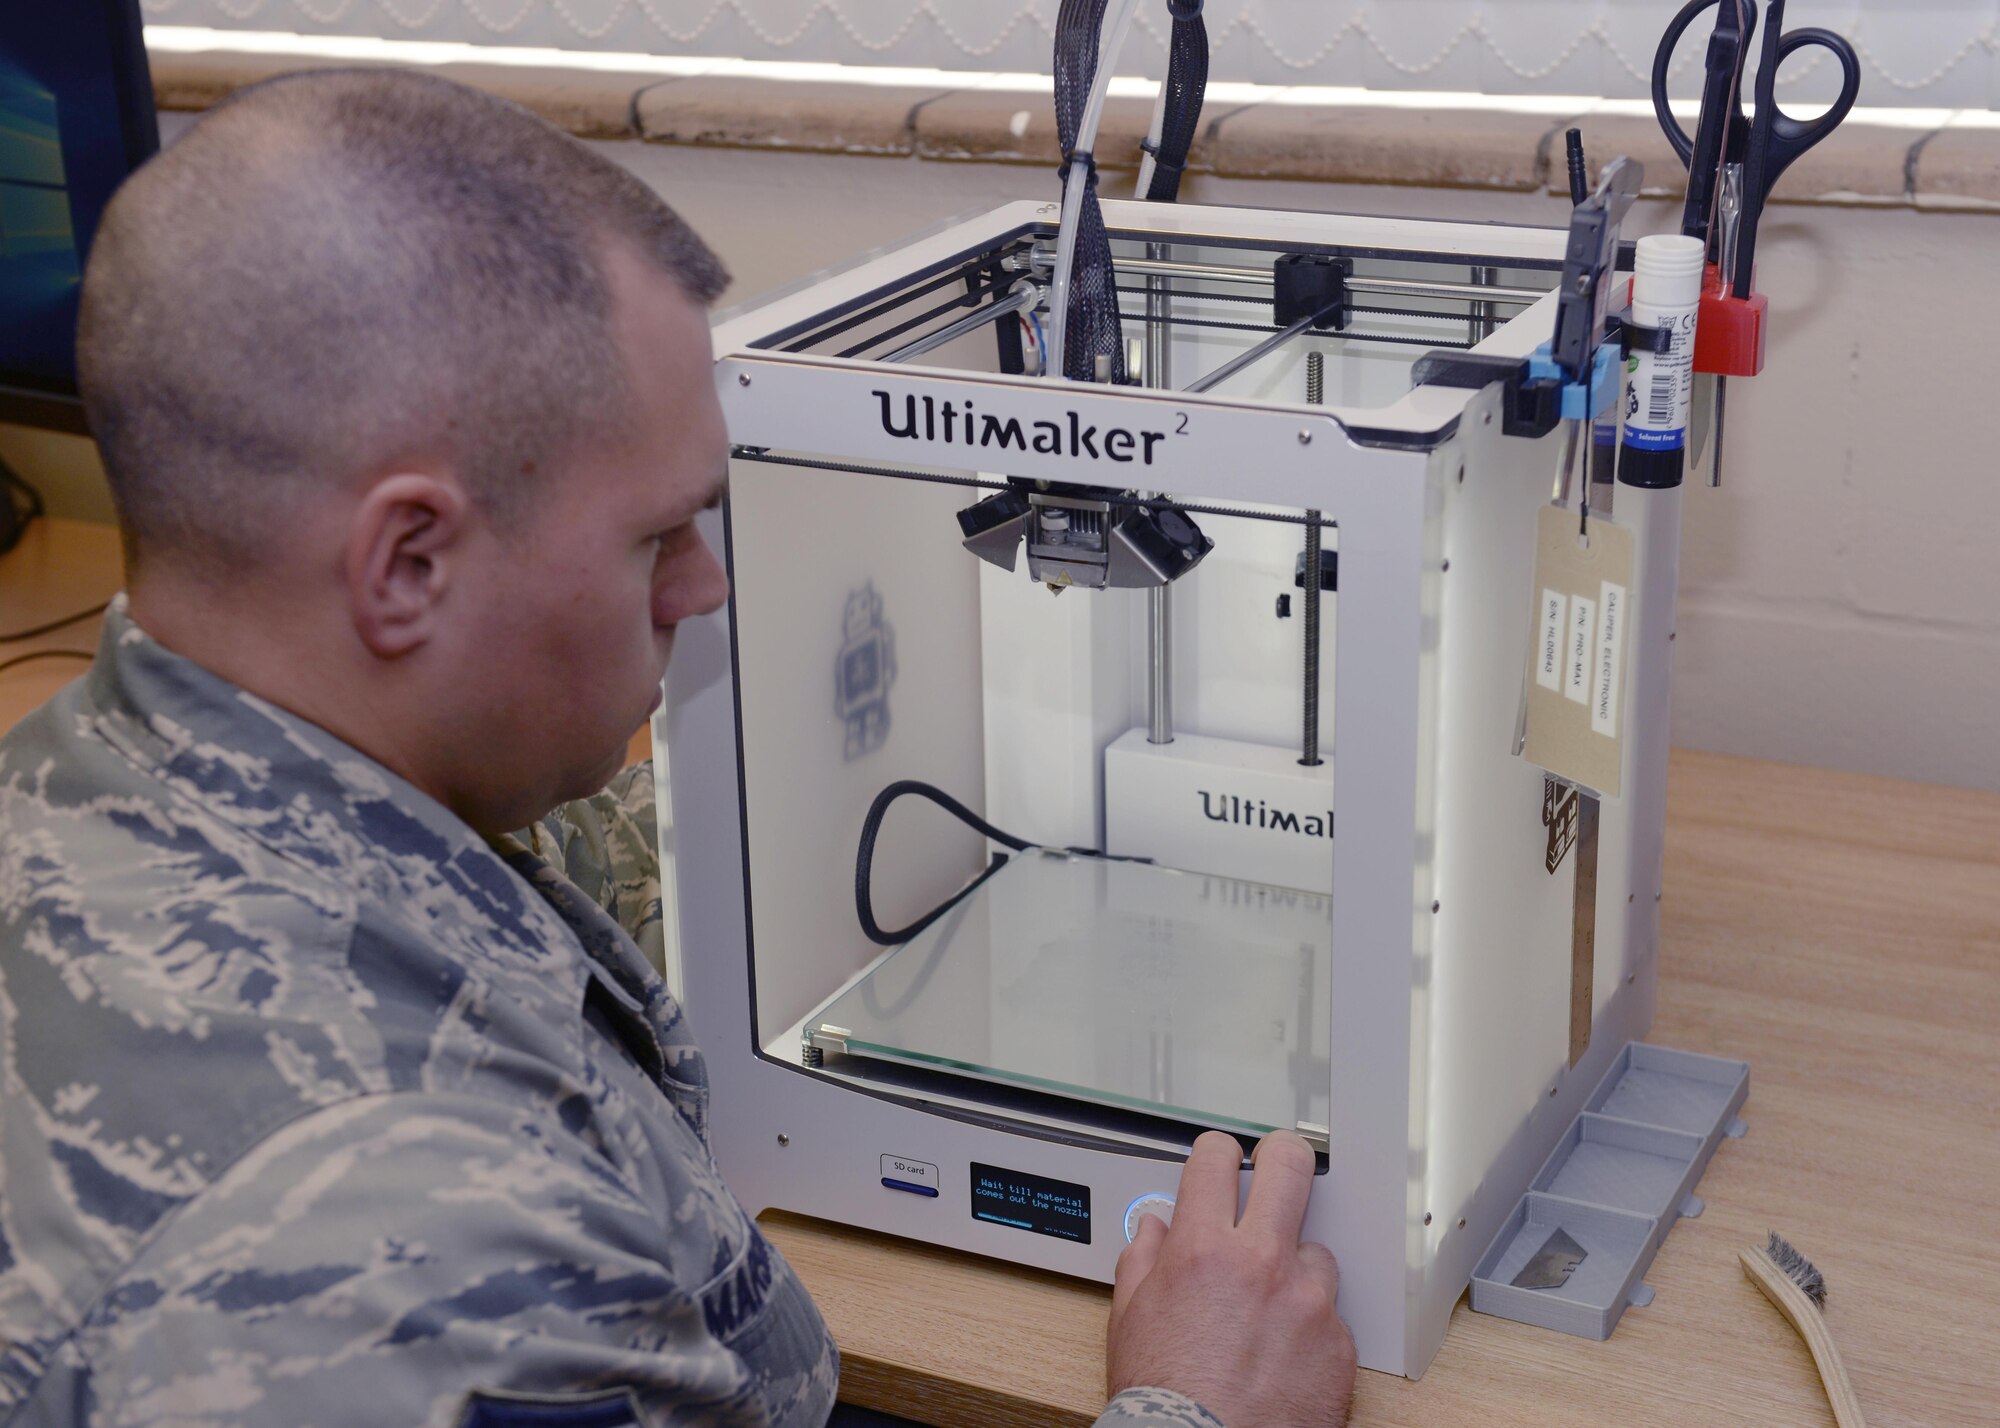 U.S. Air Force Master Sgt. David Marshall, 48th Maintenance Group Air Force Repair and Enhancement Program manager, prepares the 3-D printer to create a dental surgical guide at Royal Air Force Lakenheath, England, July 8. The printer creates 3-D objects by printing in 0.1 mm layers. (U.S. Air Force photo/Airman 1st Class Abby L. Finkel) 